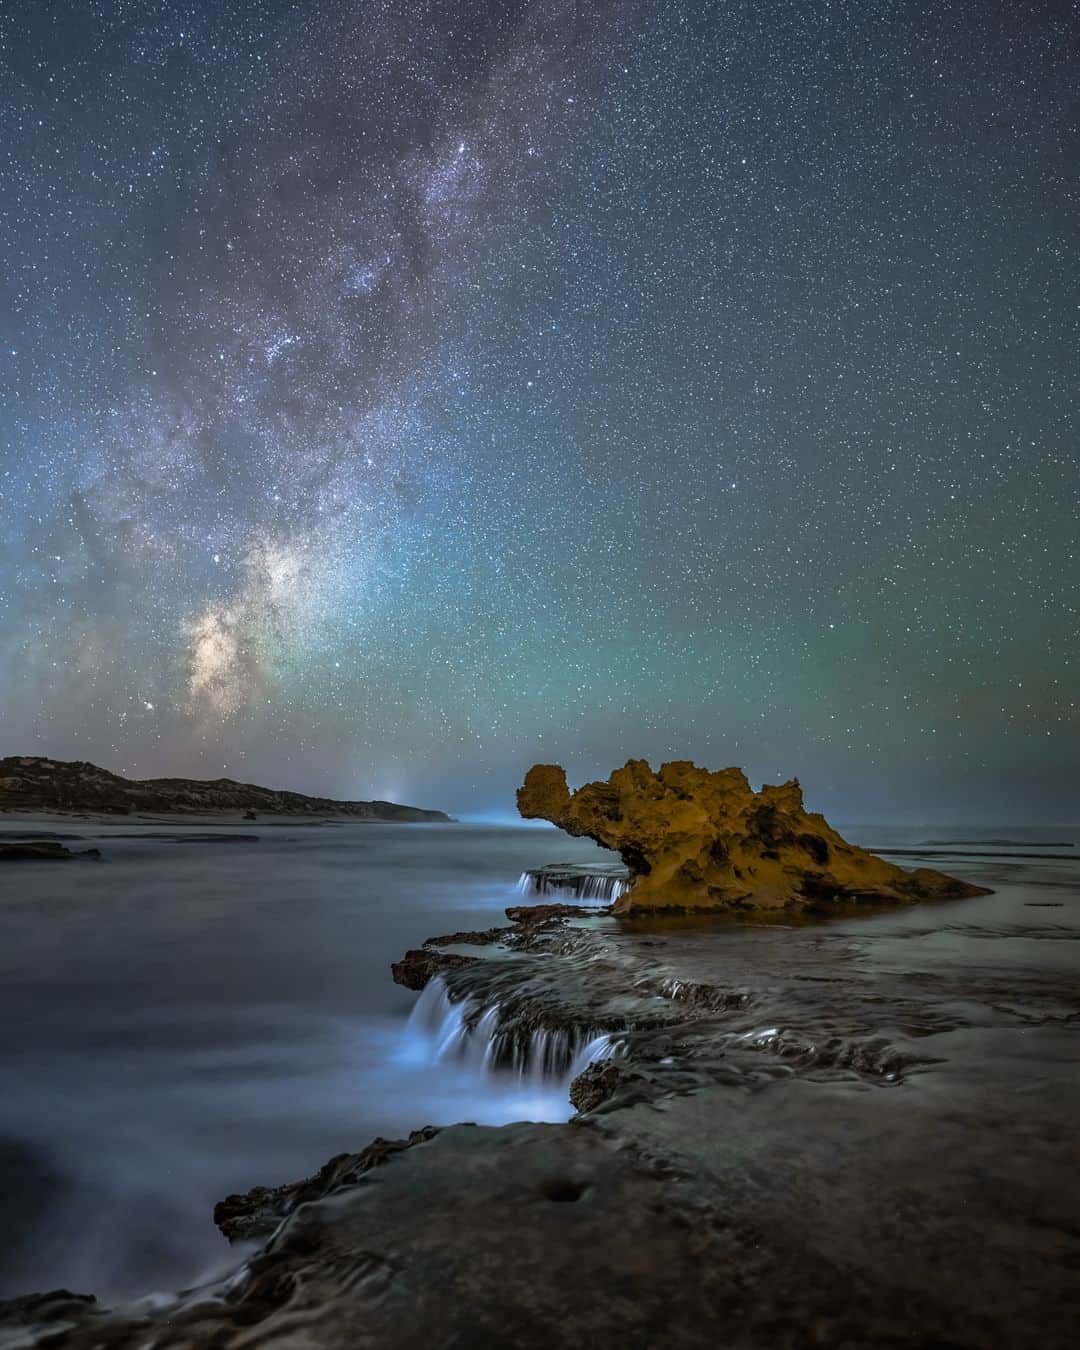 Nikon Australiaのインスタグラム：「Under the stars' light, @imagesbyriccardo's dream came to life at Number 16 beach, where the weather and tide aligned seamlessly to achieve this stunning image*.   "This location had been on my bucket list for a long time. Finally, the night was clear, and the tide was in my favour. I drove to Number 16 Beach and waited for the right moment to head down to the location.  There was no wind, and the weather conditions were perfect. As we know, it is very rare to get perfect weather conditions near the beach. I carefully selected my composition, and this is the result. I was thrilled to see the image turned out exactly as I had envisioned in my mind's eye."  Photo by @imagesbyriccardo   f/2.8 | 15 sec | ISO 3200  Captured on the Z 7 and NIKKOR Z 20mm f/1.8 S   *This image is a stacked photo  #Nikon #NikonAustralia #MyNikonLife #NikonCreators #NIKKOR #Zseries #LandscapePhotography #SeascapePhotography #AstroPhotography #Australia」